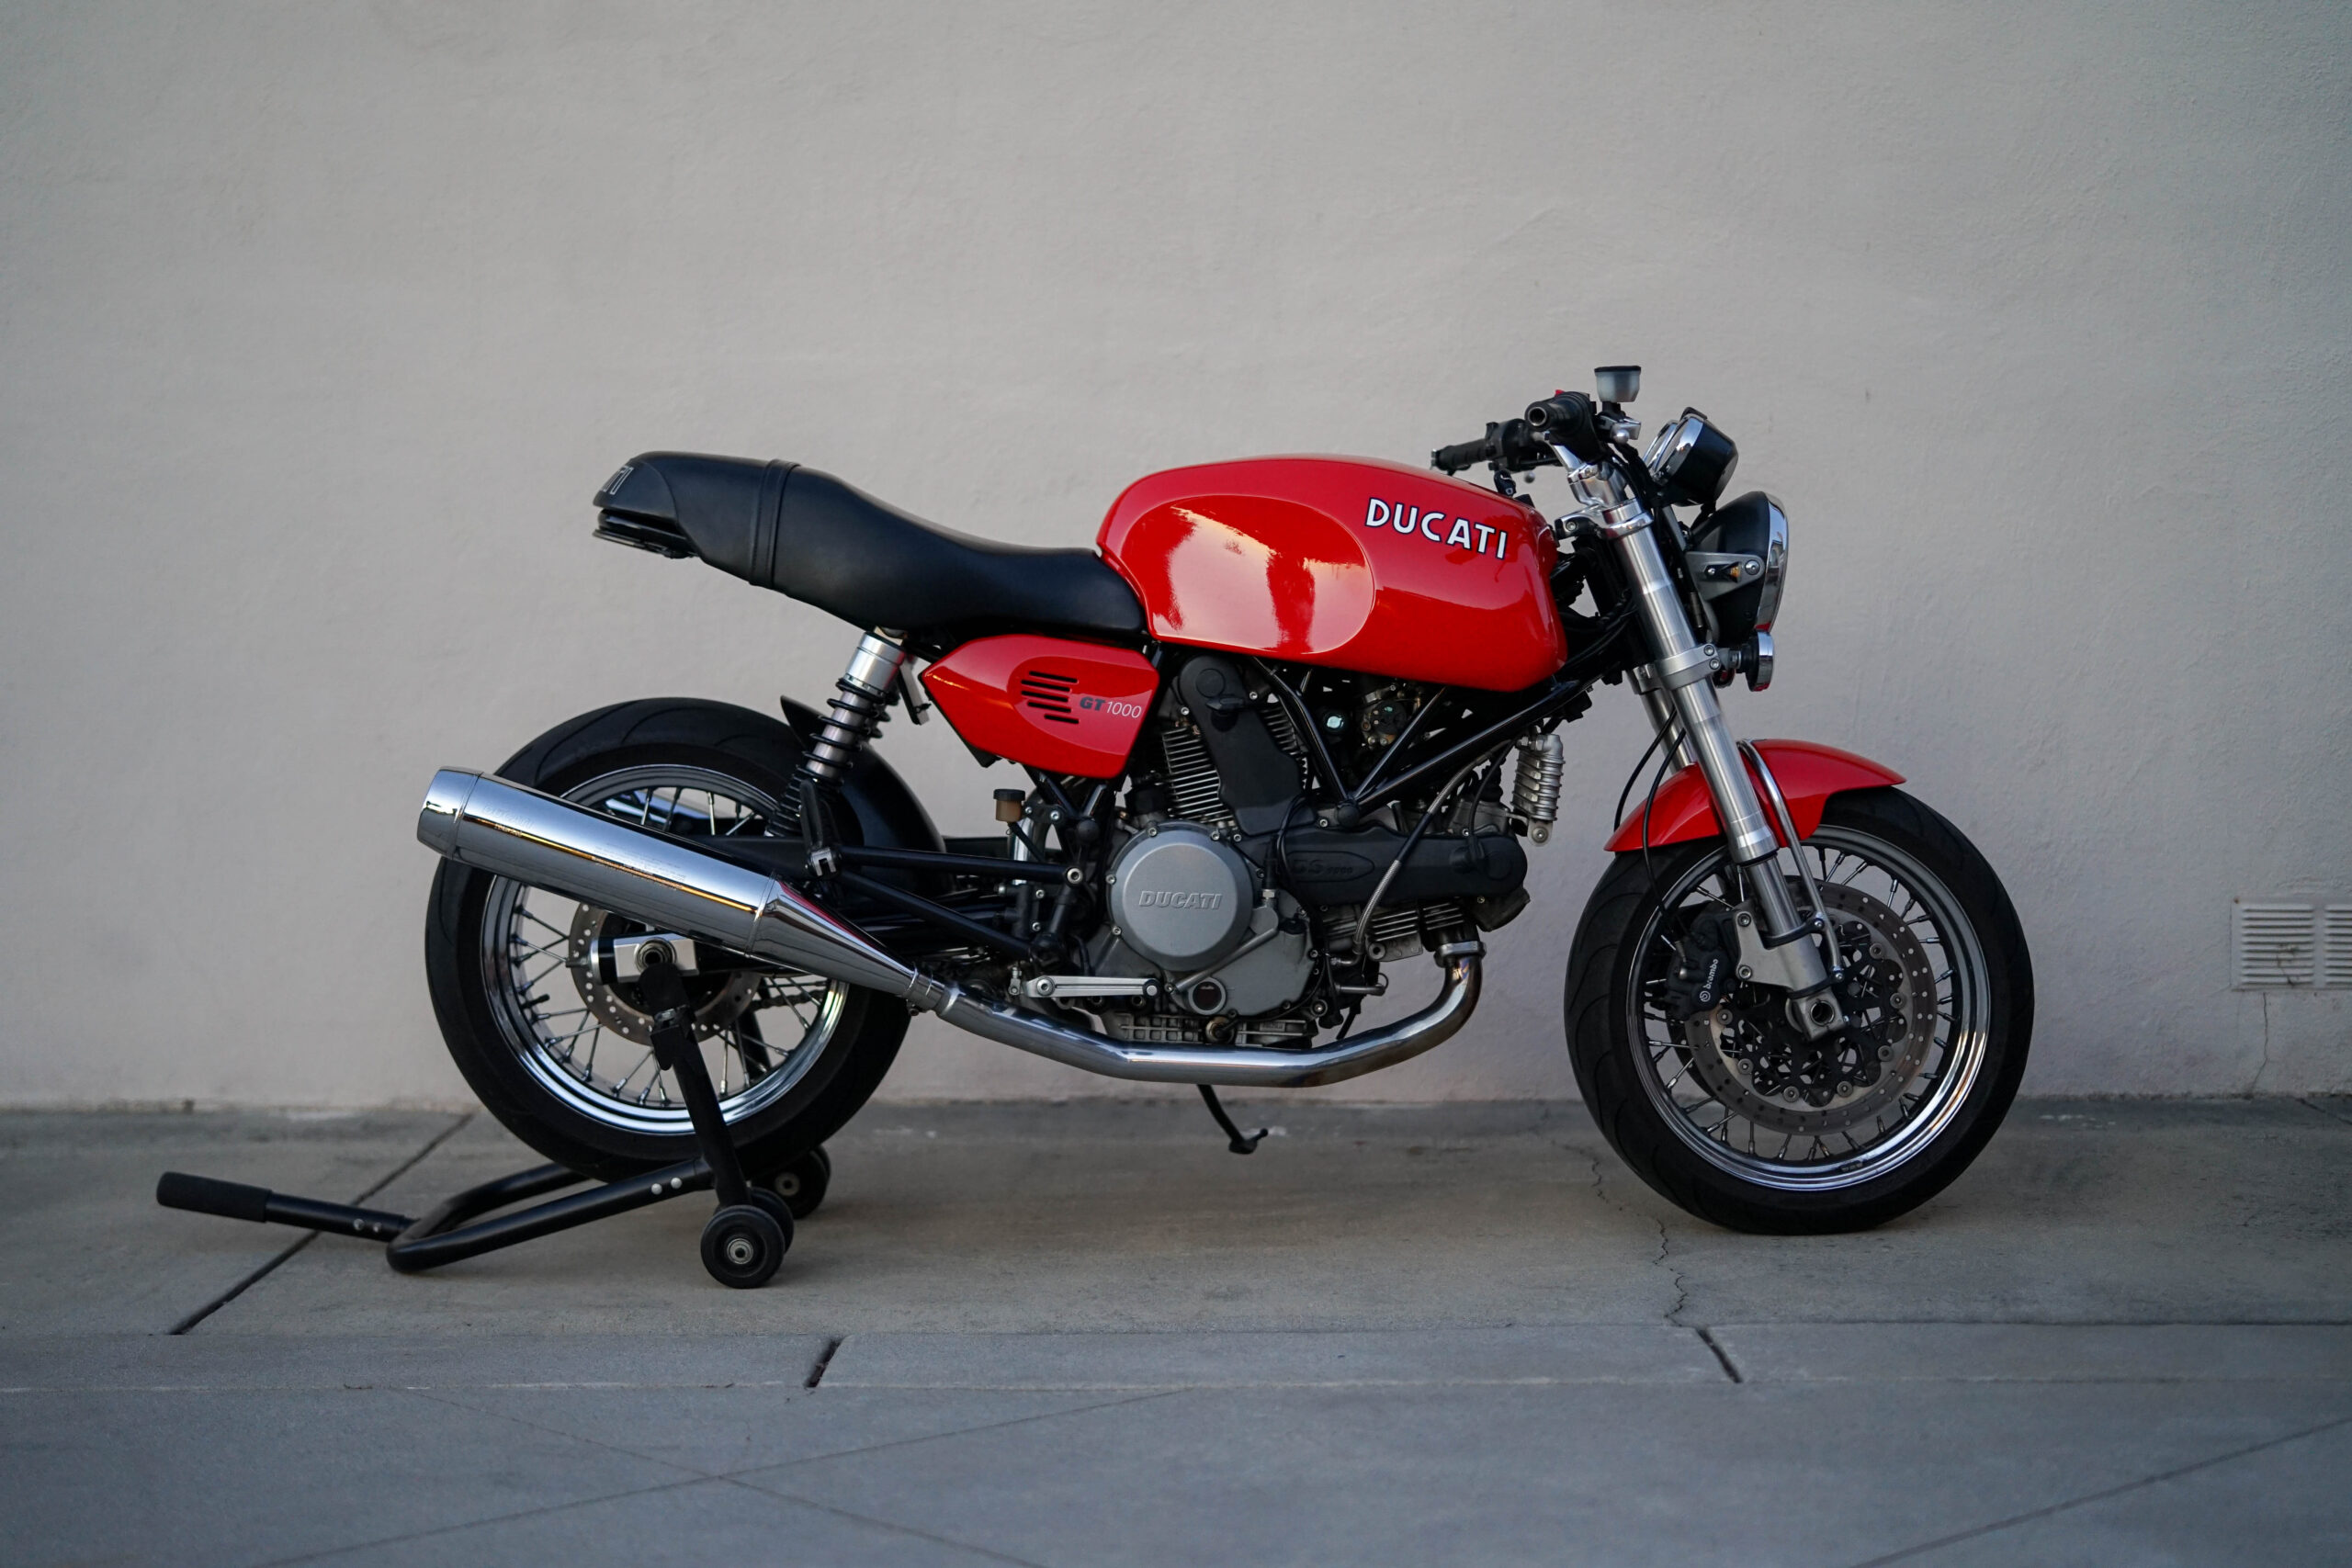 Our Ducati GT1000 is for sale